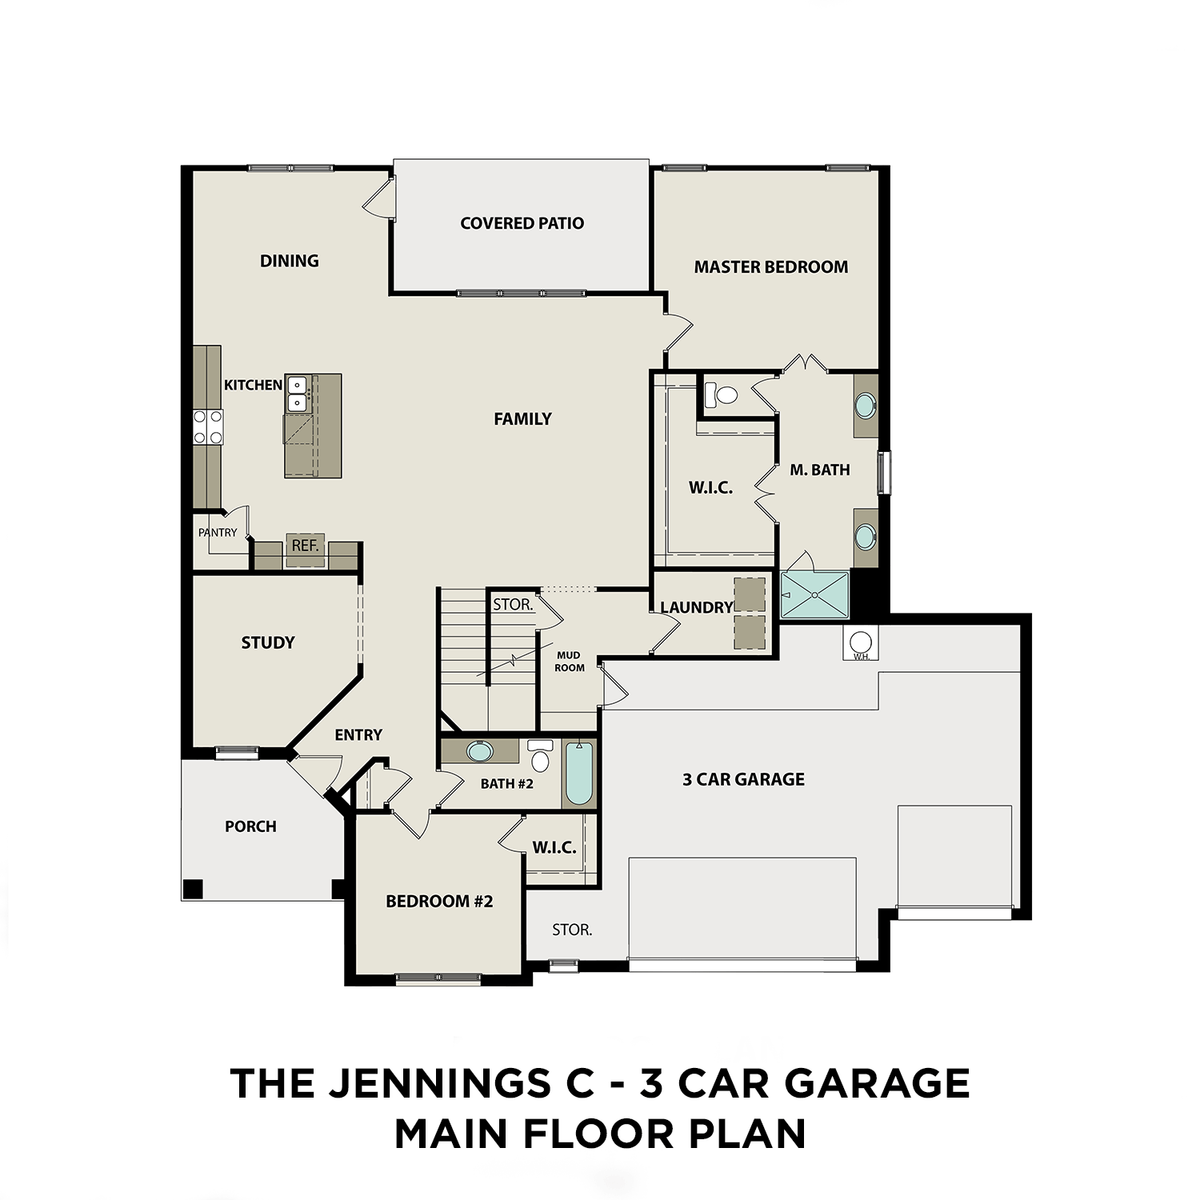 1 - The Jennings C with 3-Car Garage floor plan layout for 2531 Kingfisher Drive in Davidson Homes' Rivers Edge community.